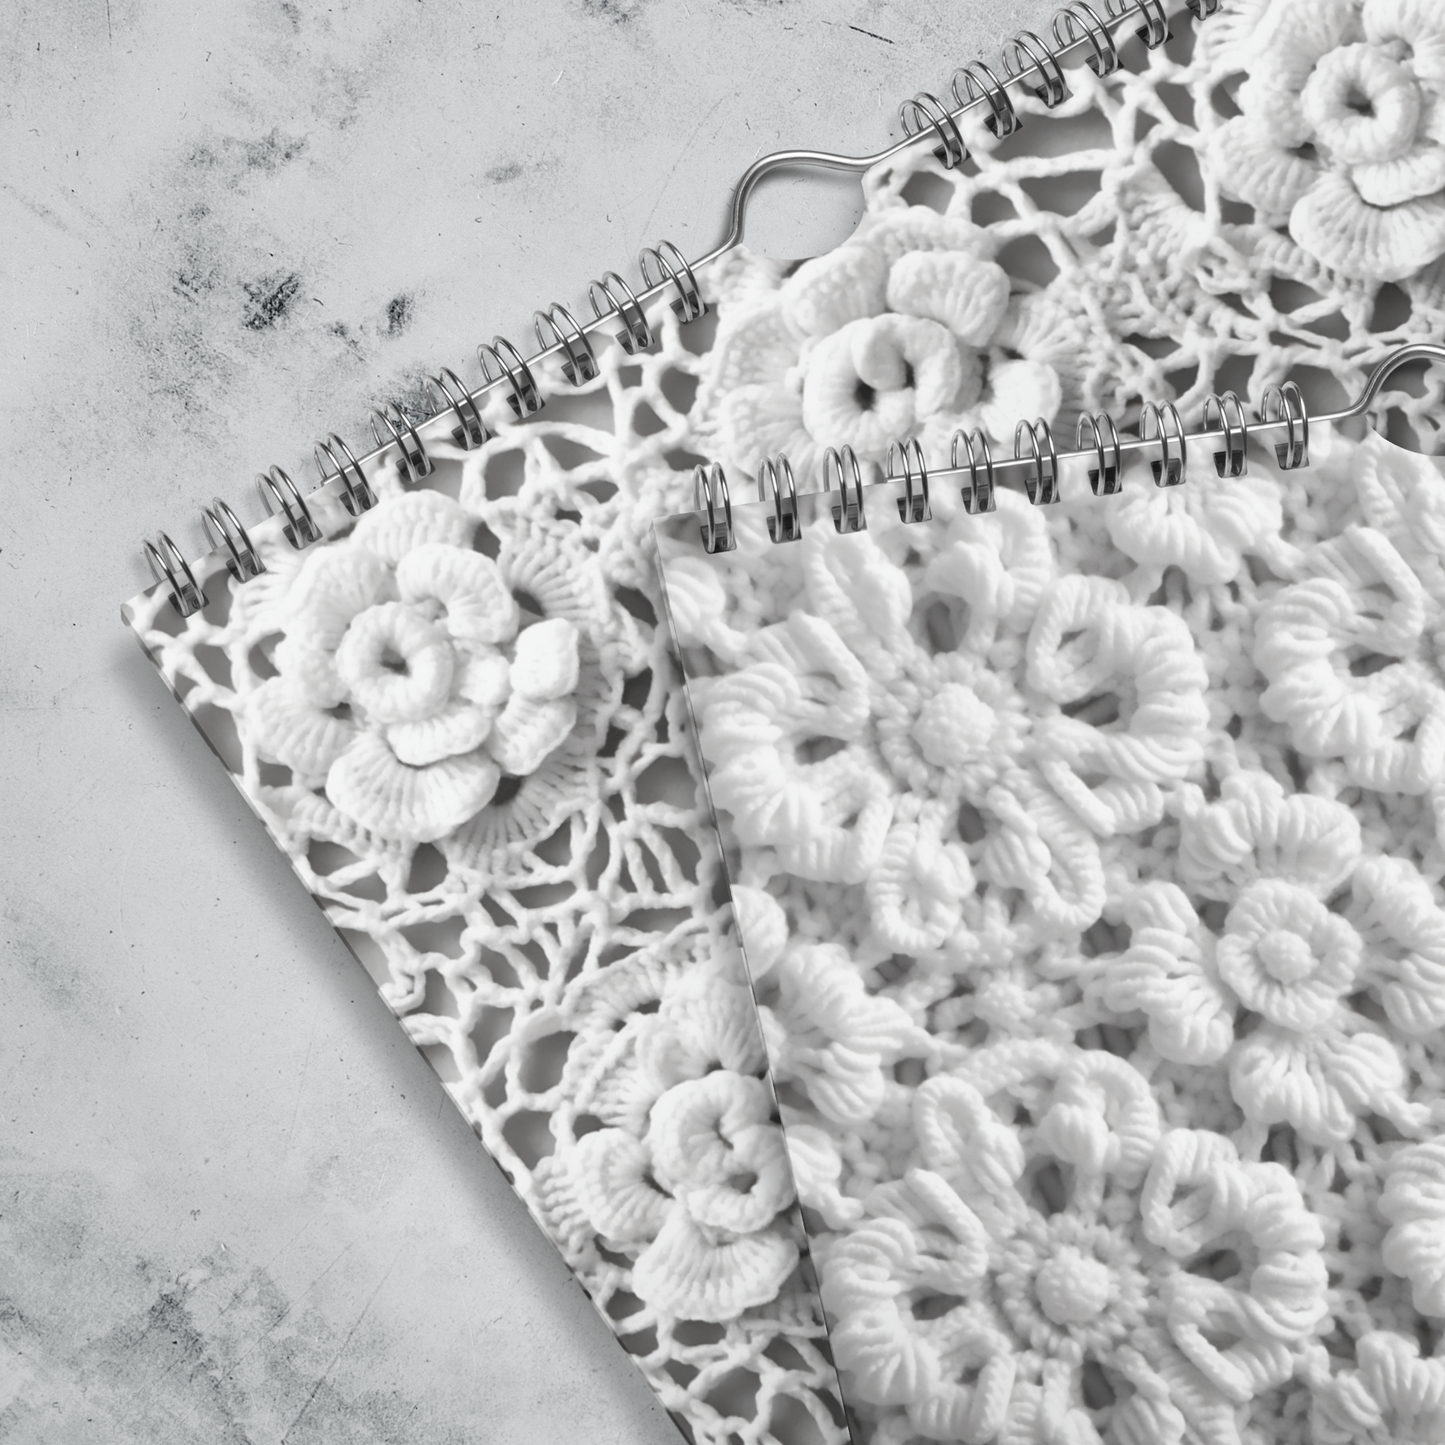 A Crochet Patterns Wall Calendar for 2024 on a marble surface, perfect for crochet enthusiasts.